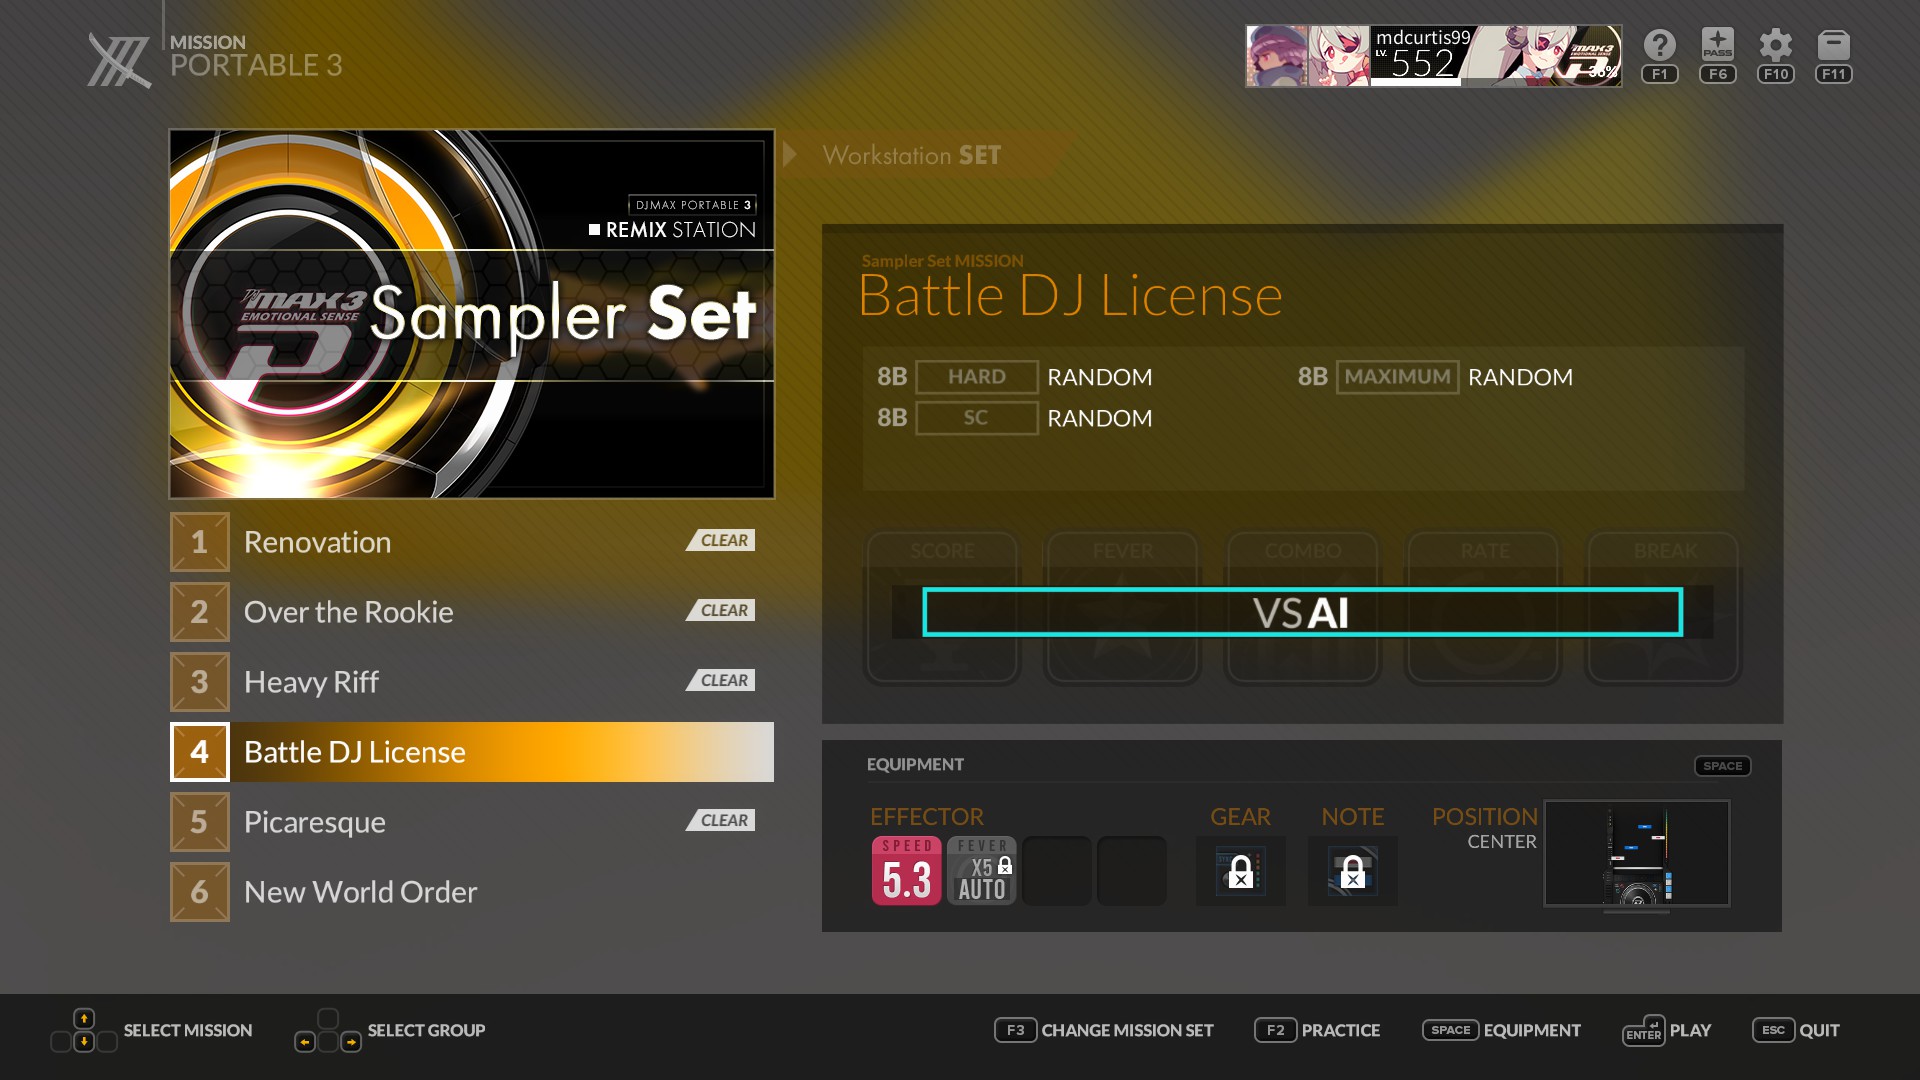 DJMAX RESPECT V - Full Walkthough + All Achievements Guide Complete - Base Game Achievements - Missions - A5C168B